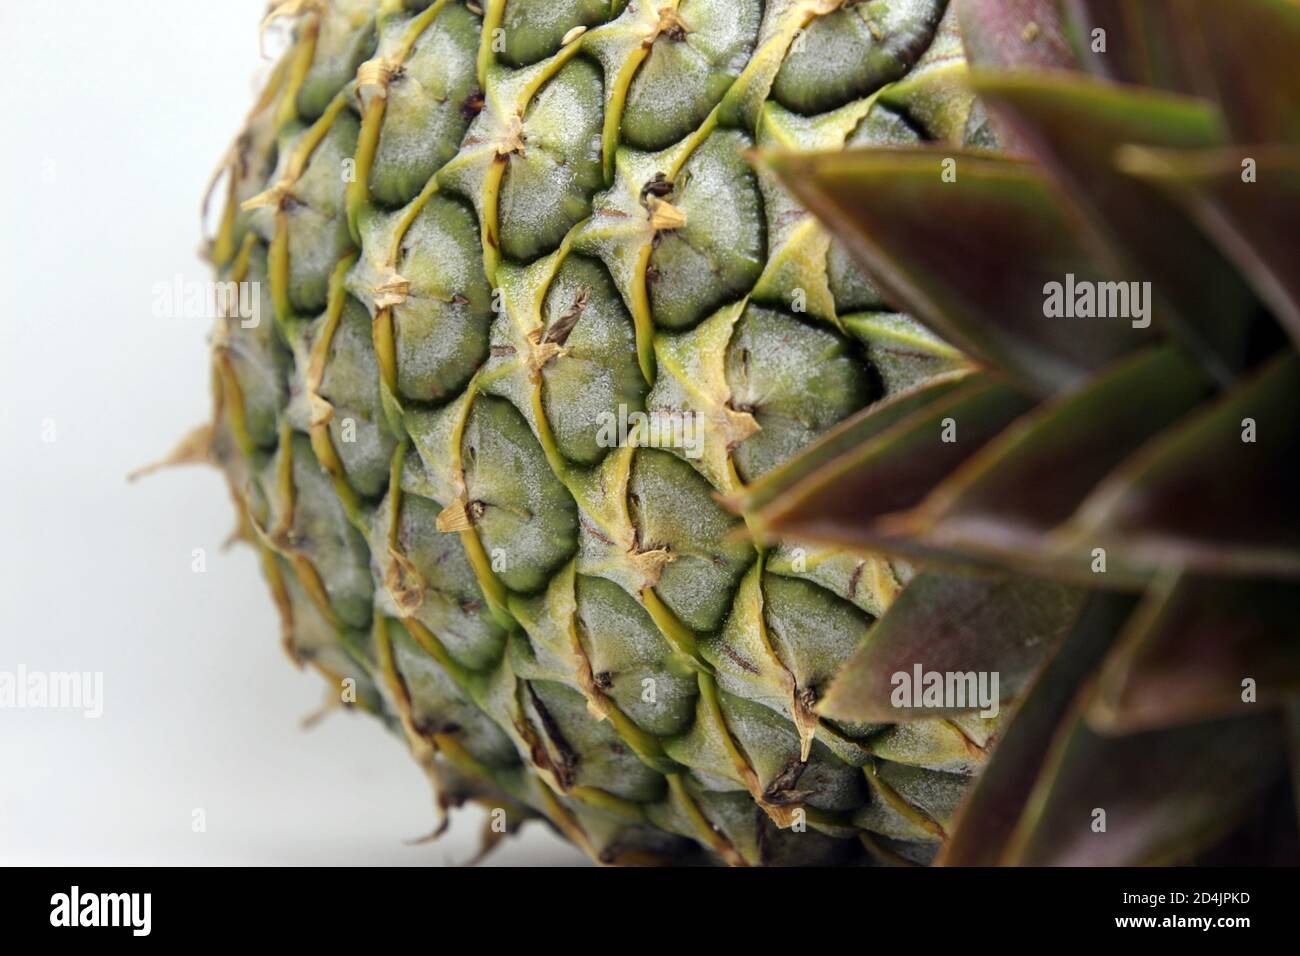 Close-up of pineapples, you can clearly see the bark and green shoots. Stock Photo